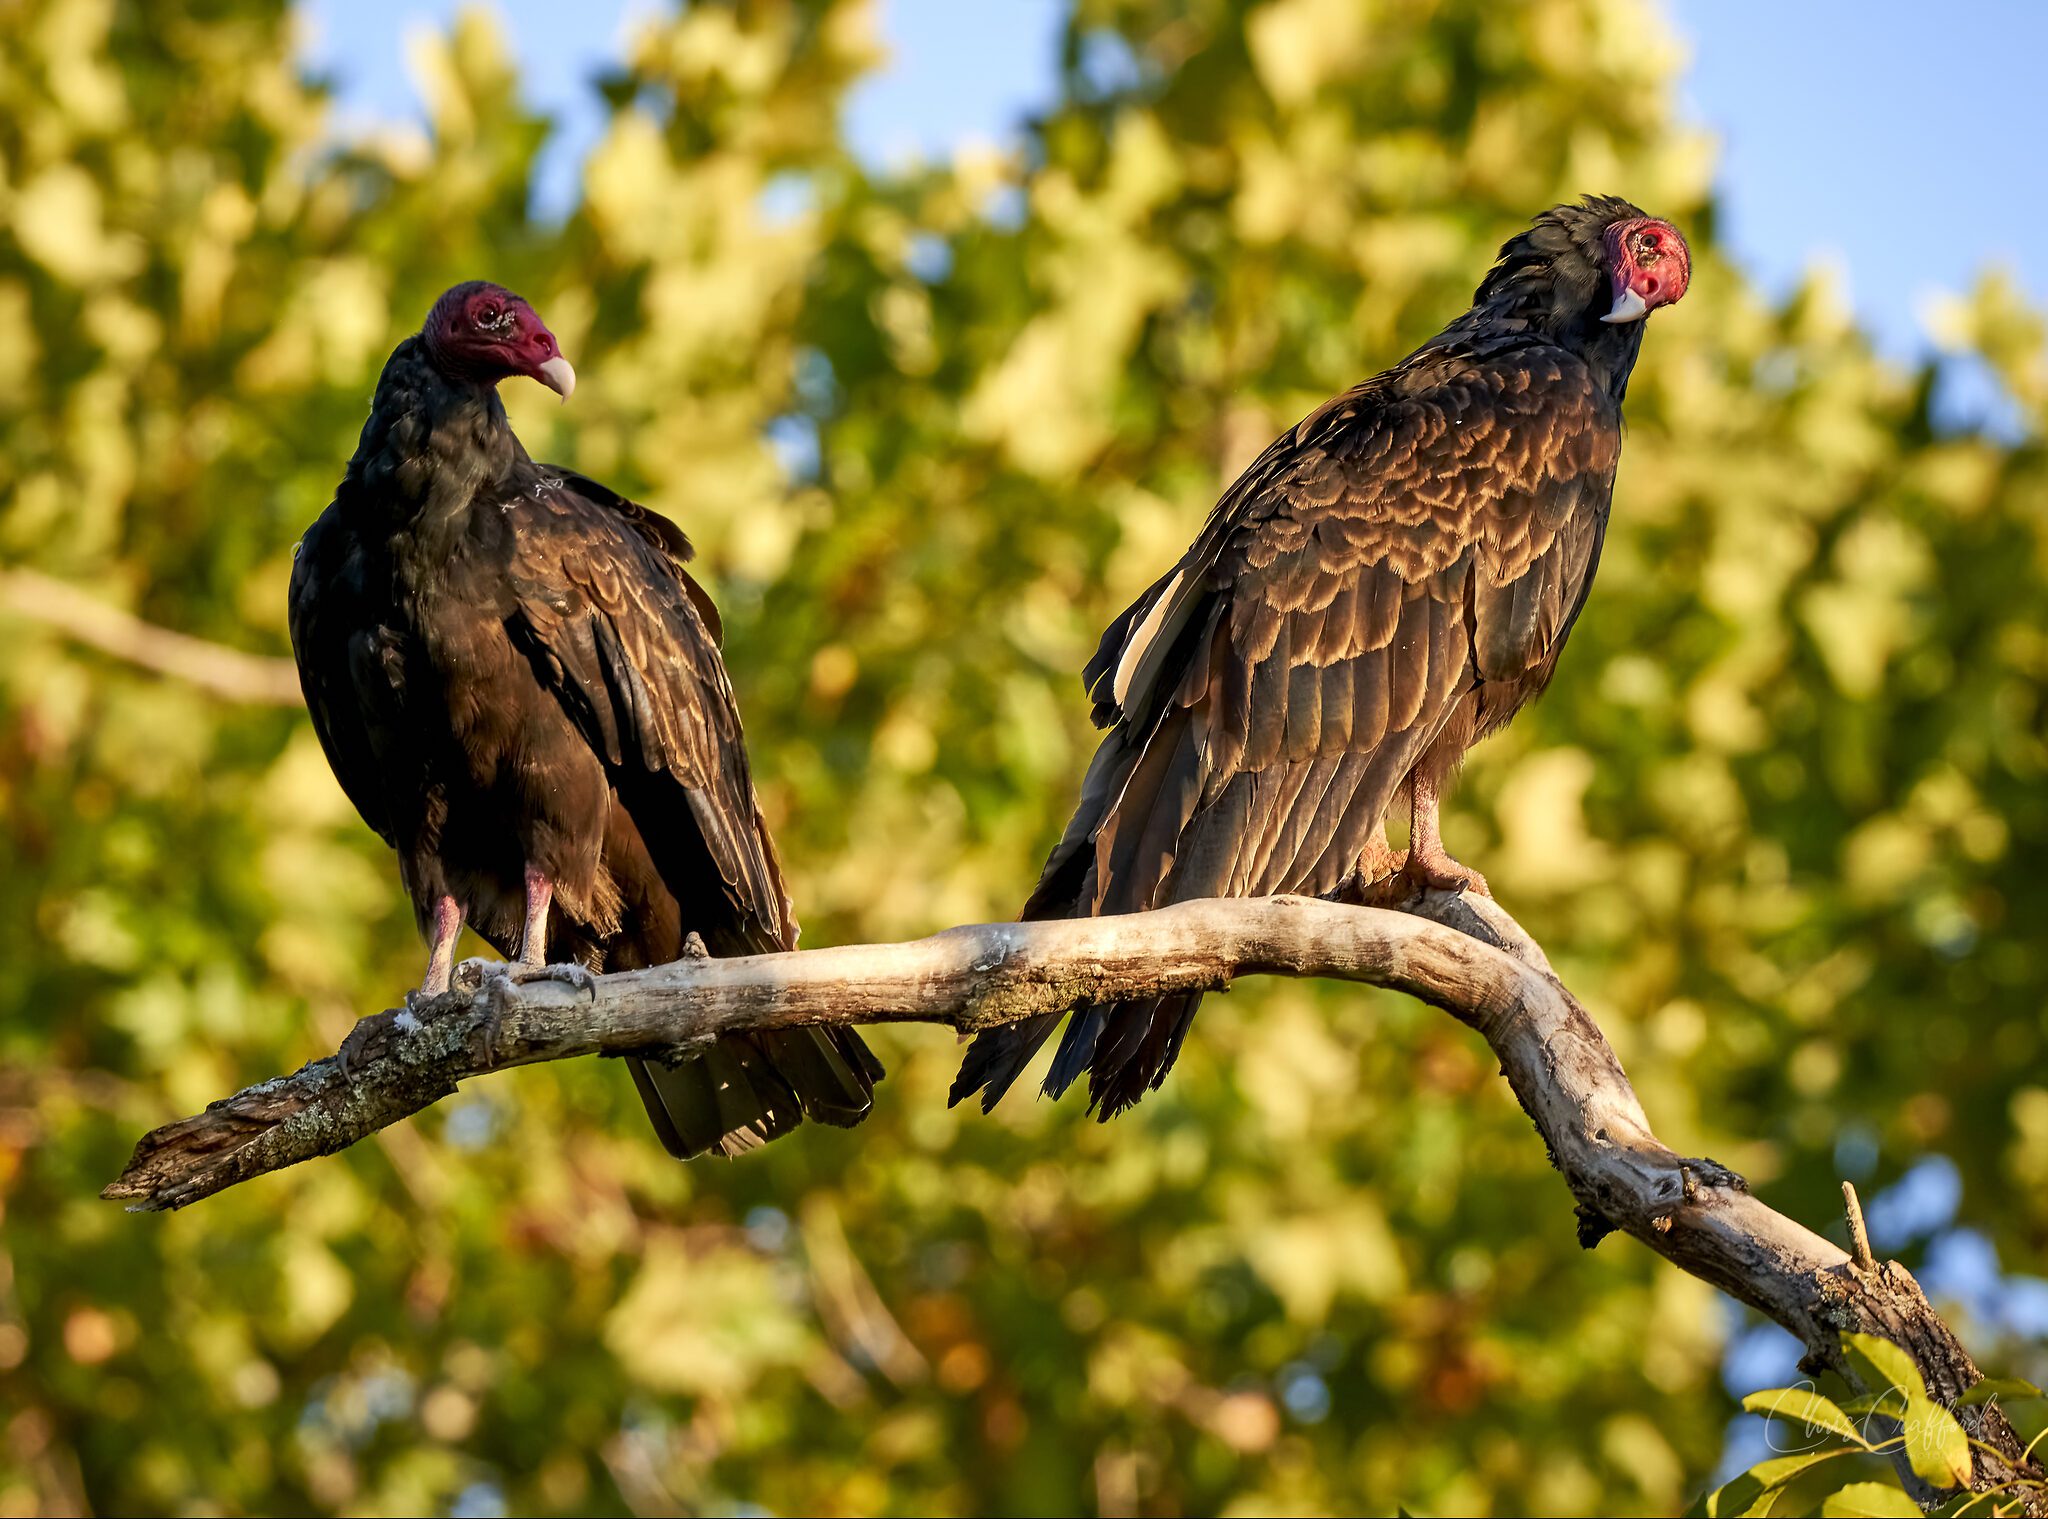 Pair of young turkey vultures